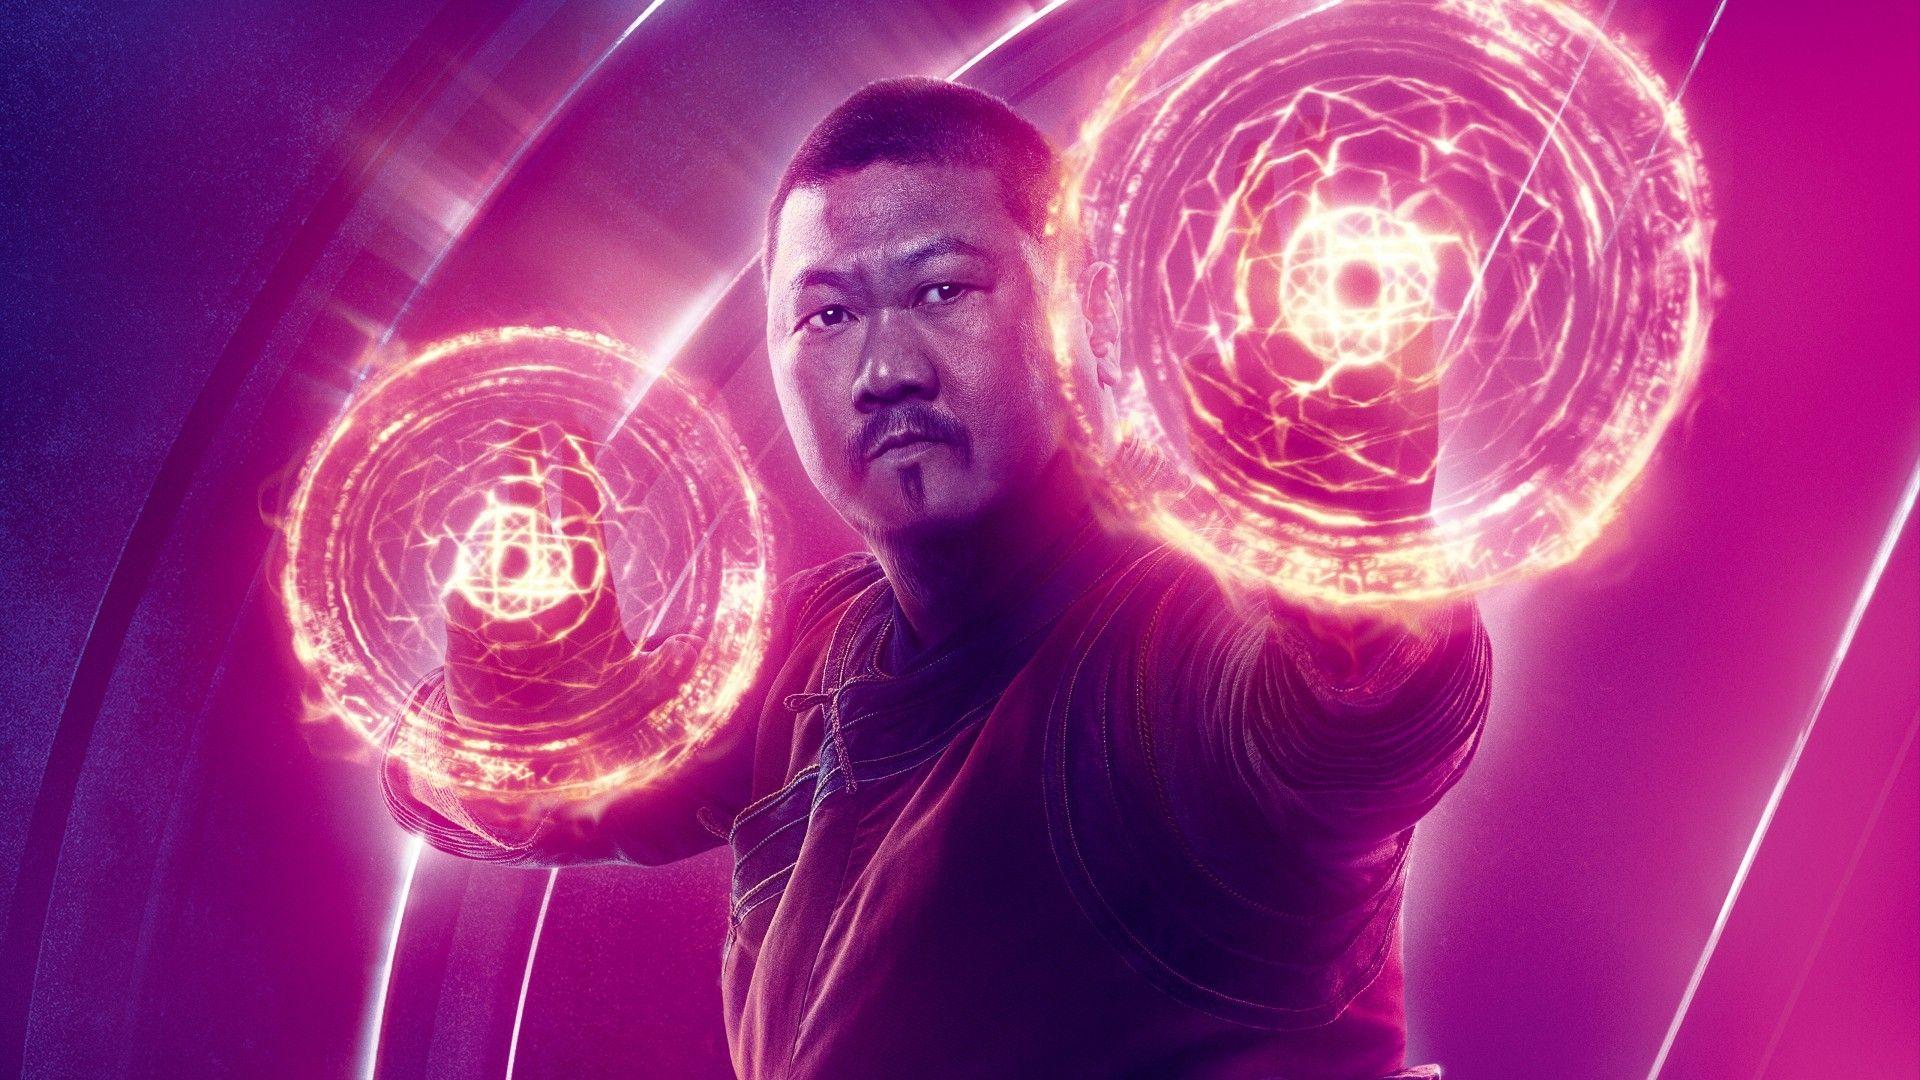 The role of Wong is played by British actor Benedict Wong in the MCU.